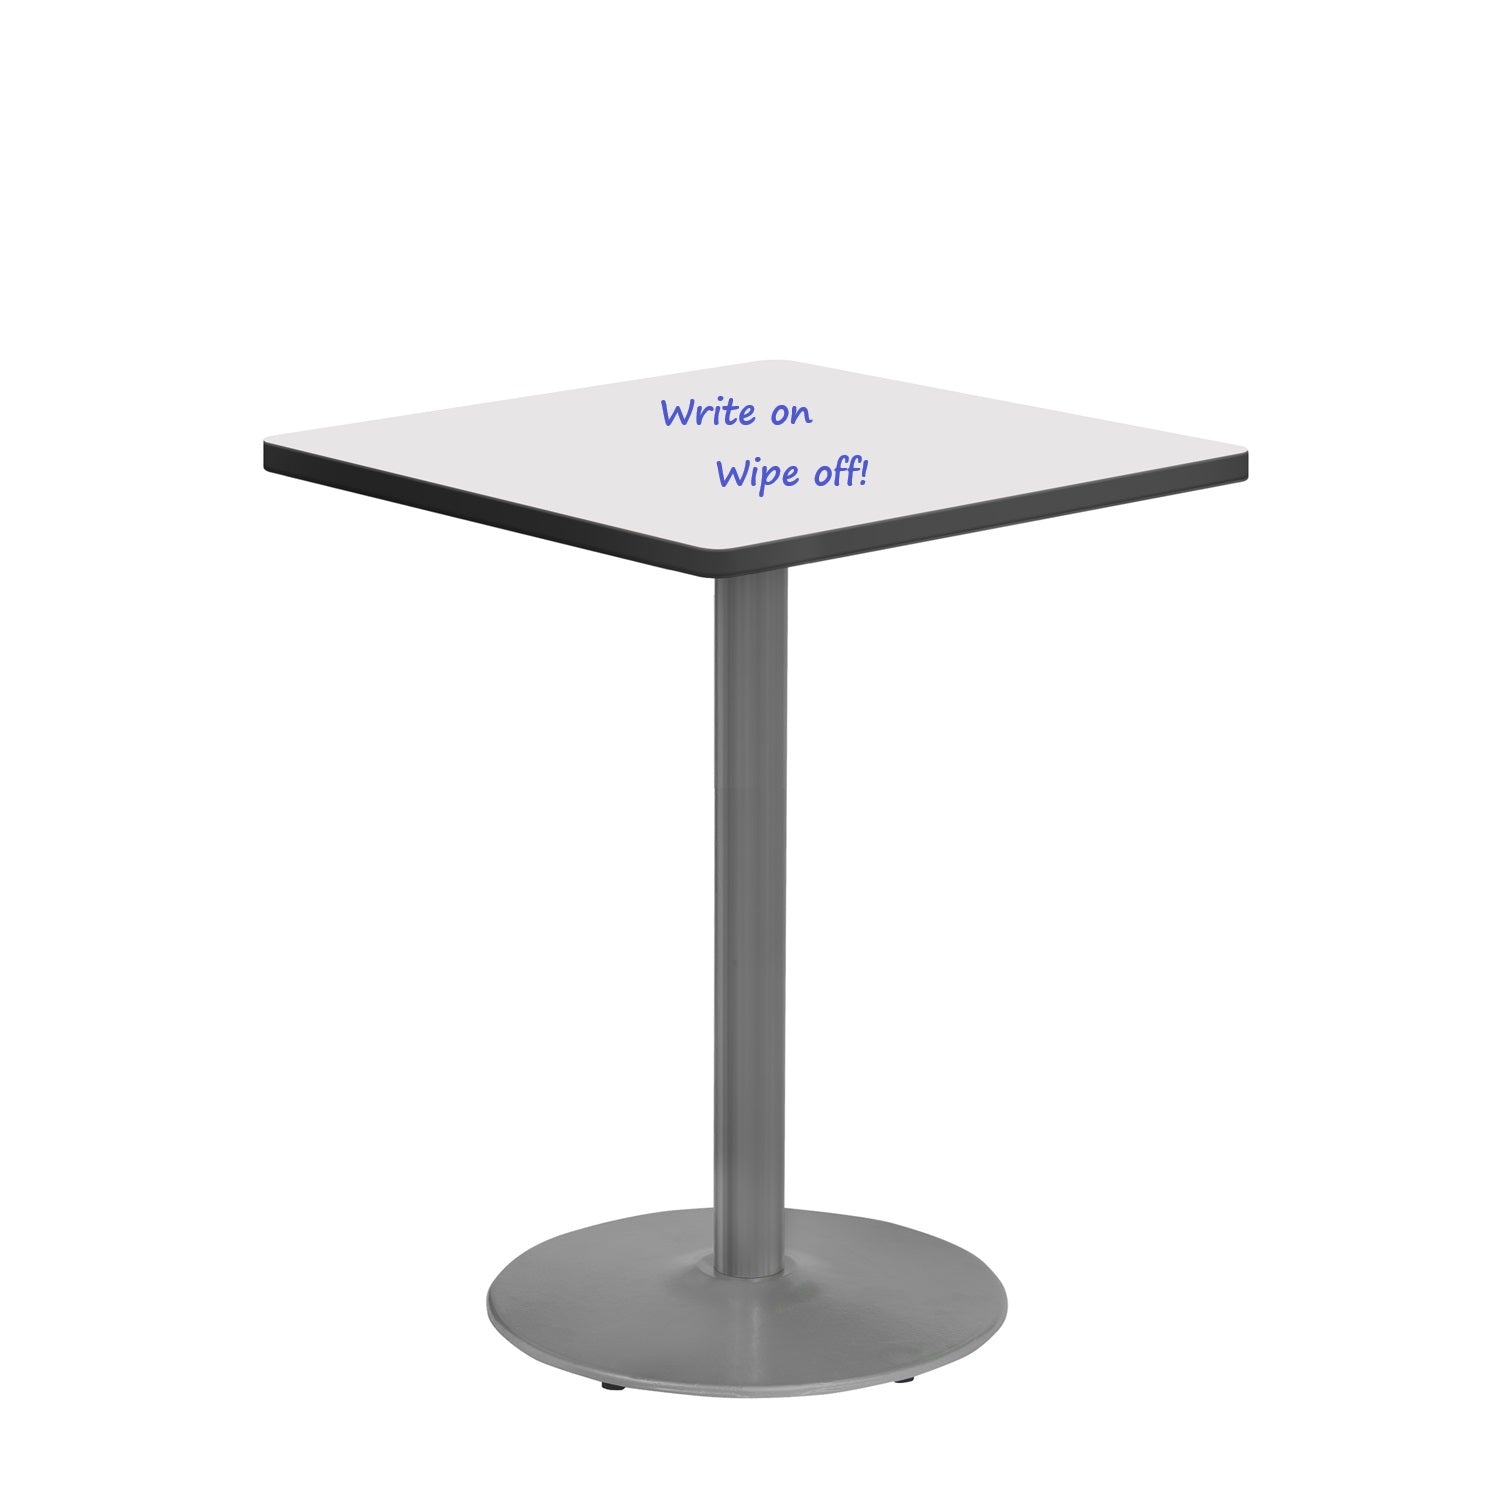 30" Square Standing Height Café Table with Dry-Erase Laminate Markerboard Top